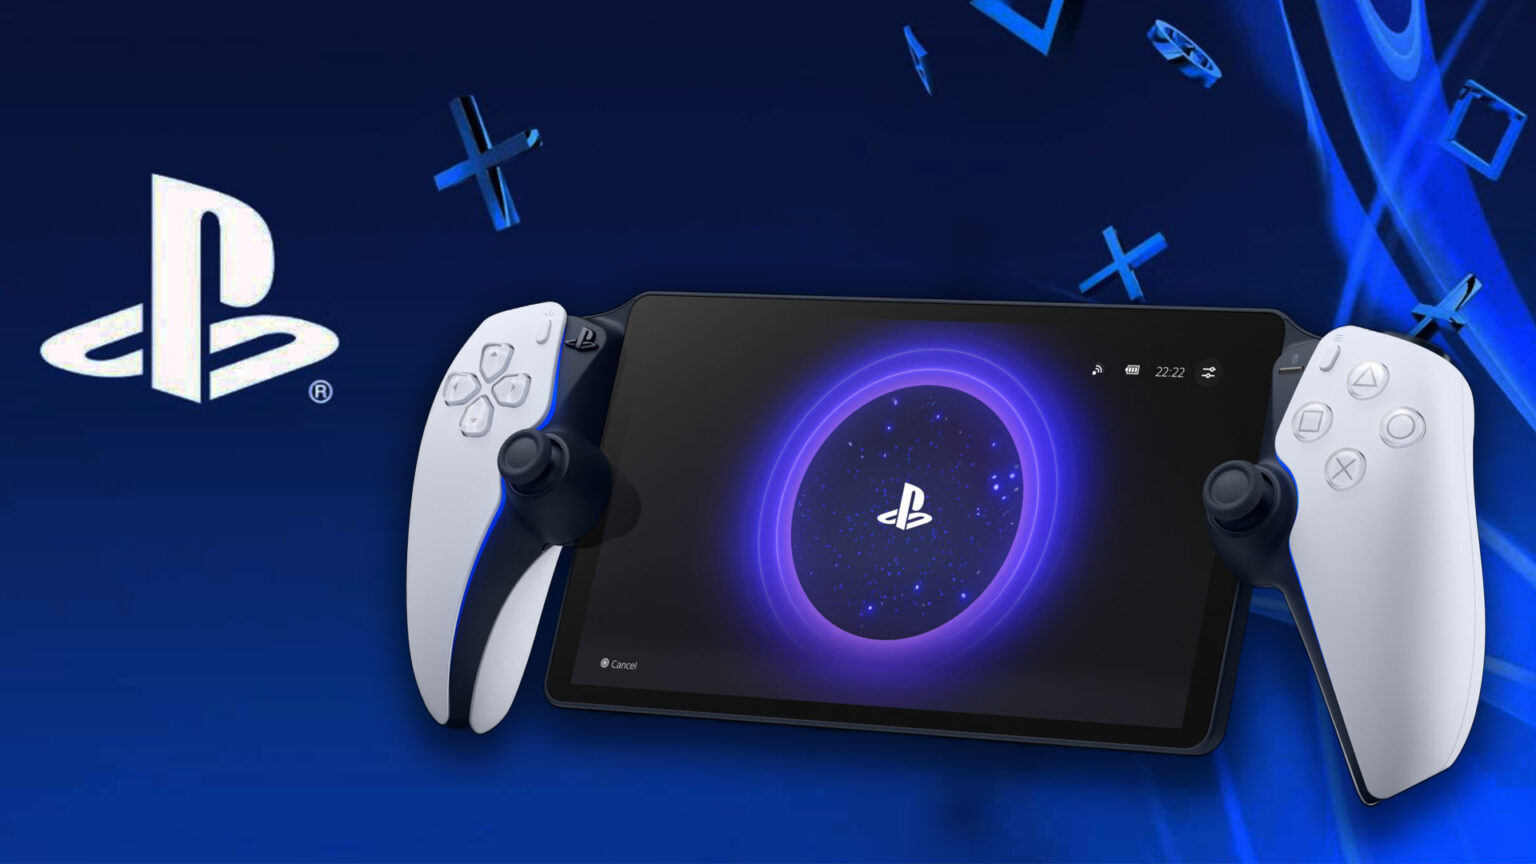 PLAYSTATION PORTAL PS5 Remote Play Device Overview 